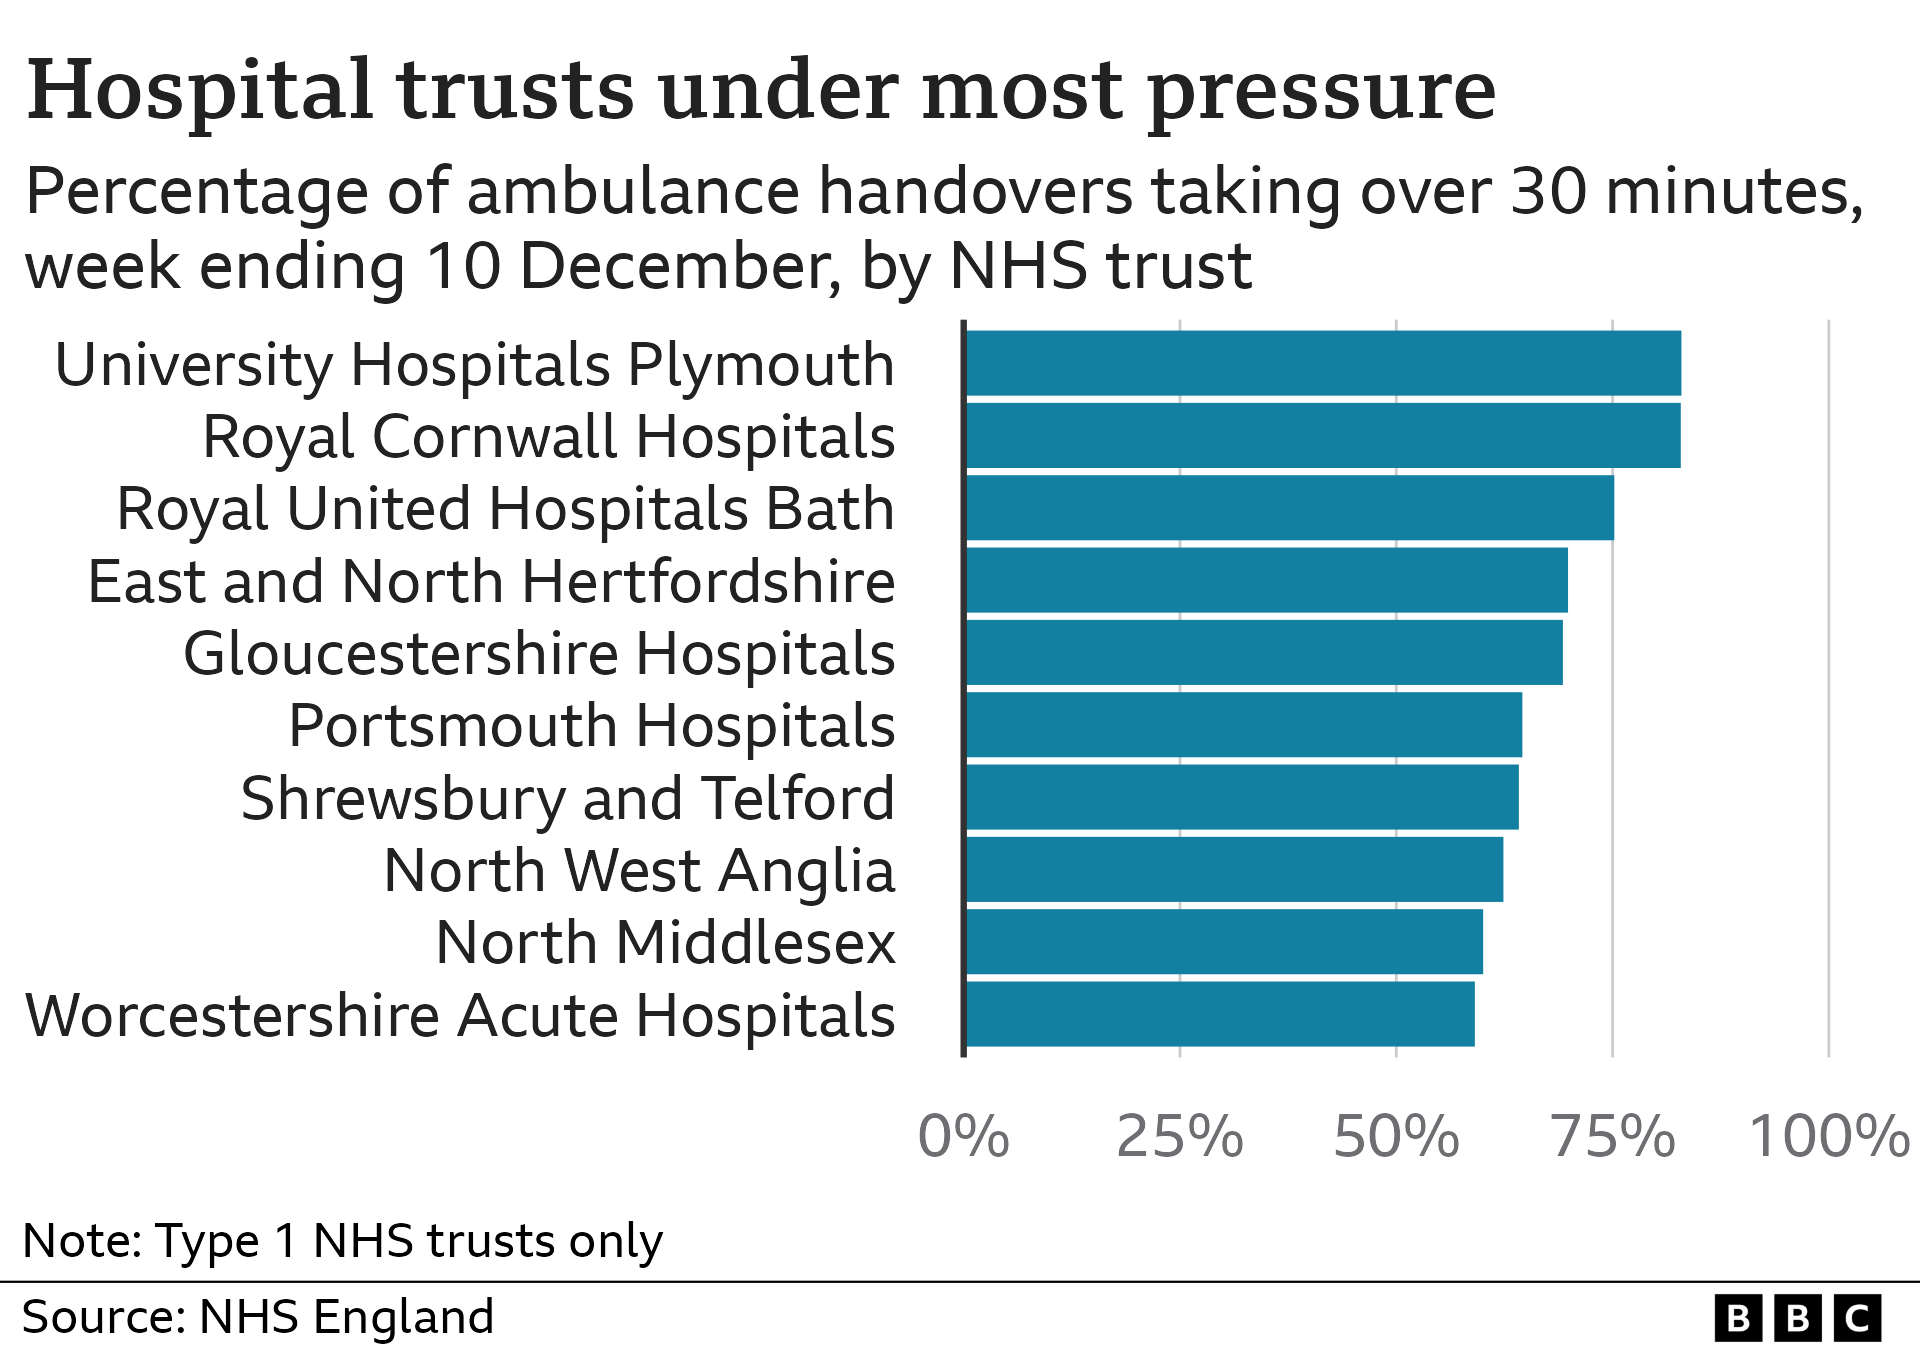 A bar chart showing the 10 NHS trusts in England with the highest percentage of ambulance handovers taking over 30 minutes. University Hospitals Plymouth is at the top with 83% and Worcestershire Acute Hospitals is the 10th highest with 58%. It should only take 15 minutes